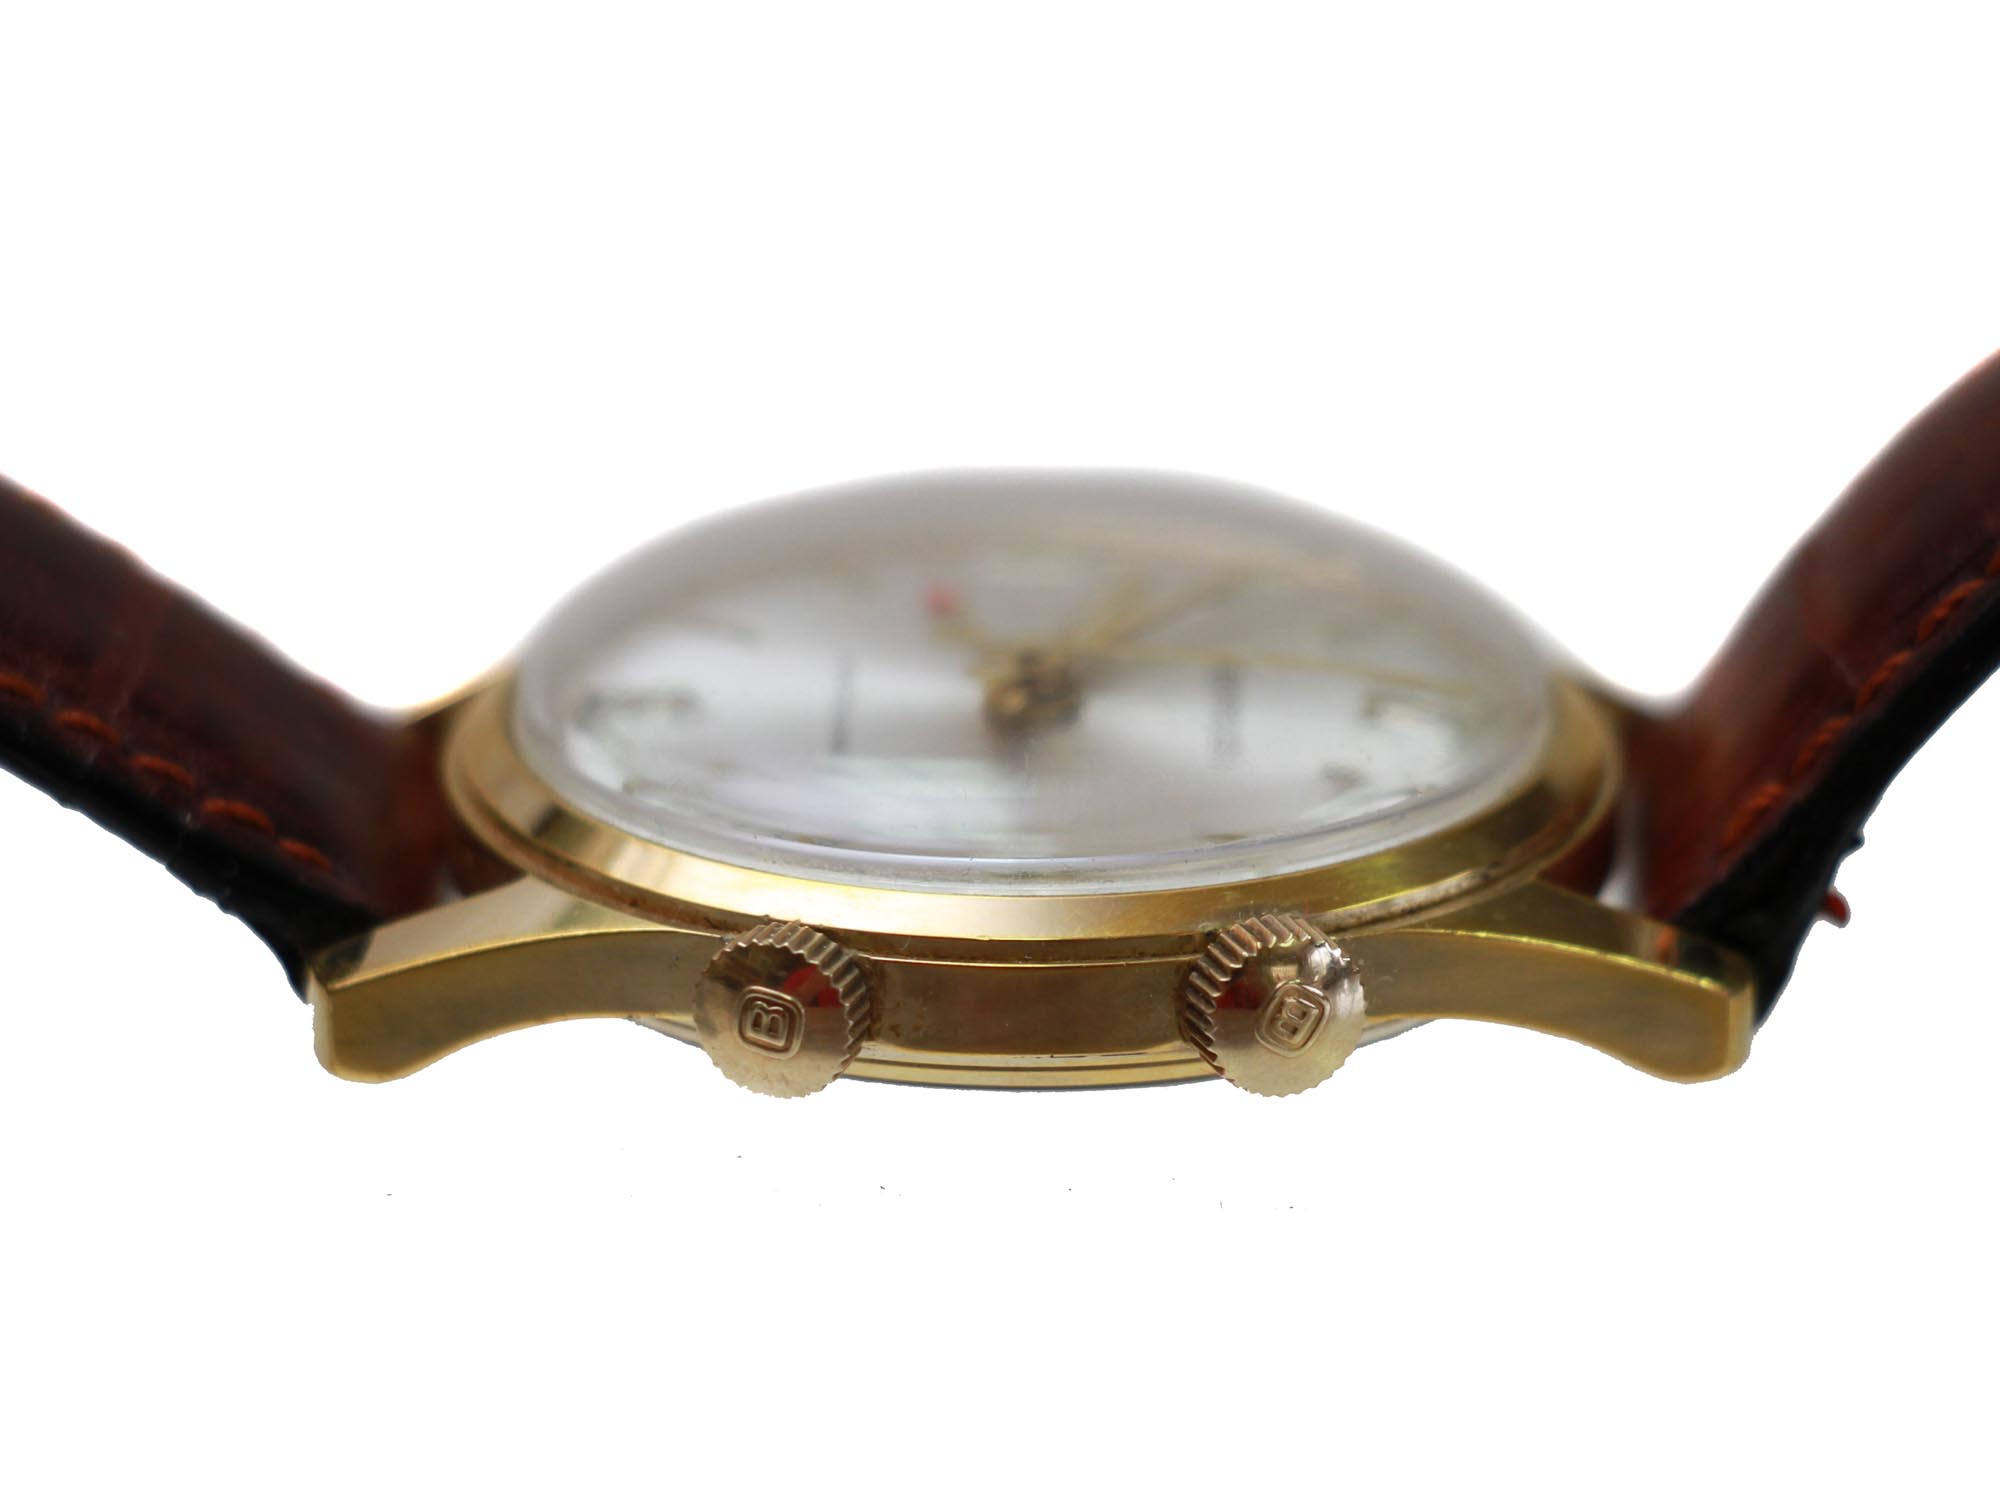 A VINTAGE BENRUS WR 14K GOLD ELECTROPLATE WATCH PIC-3